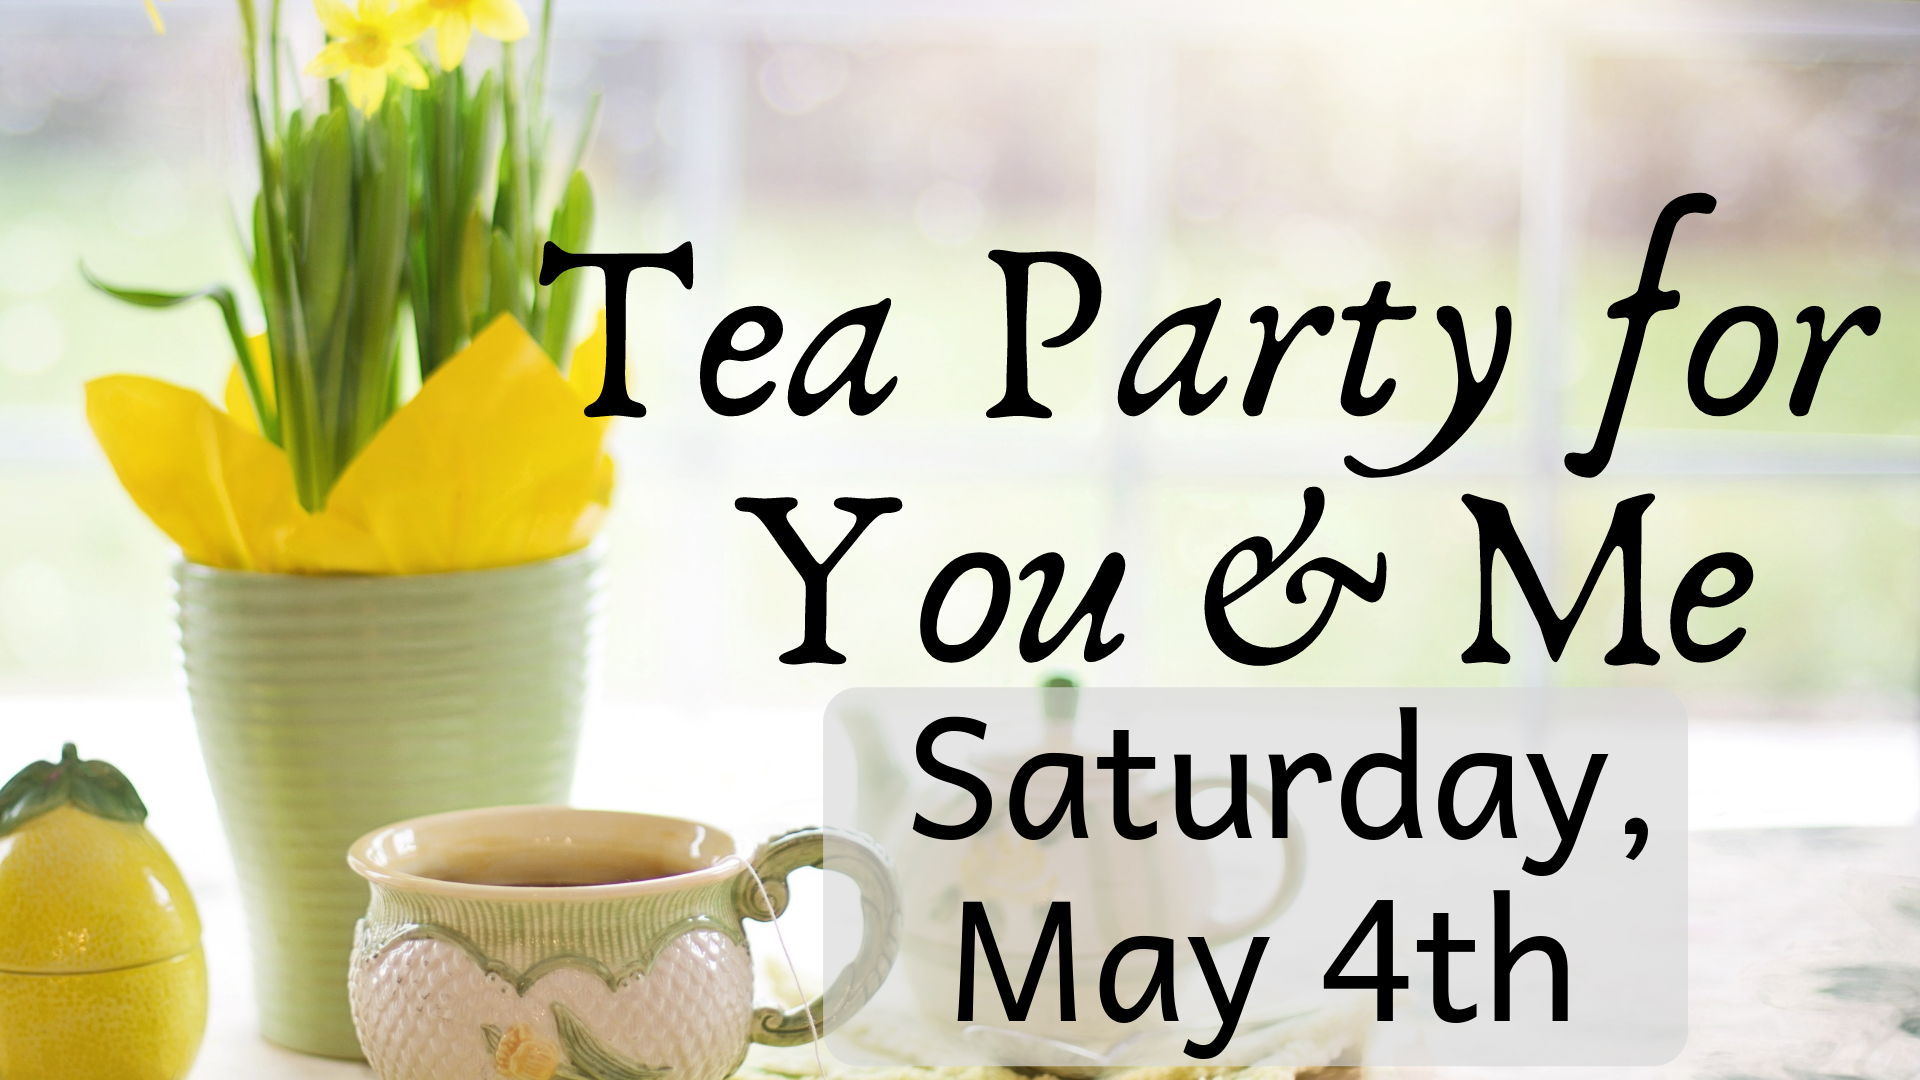 Tea Party for You and Me